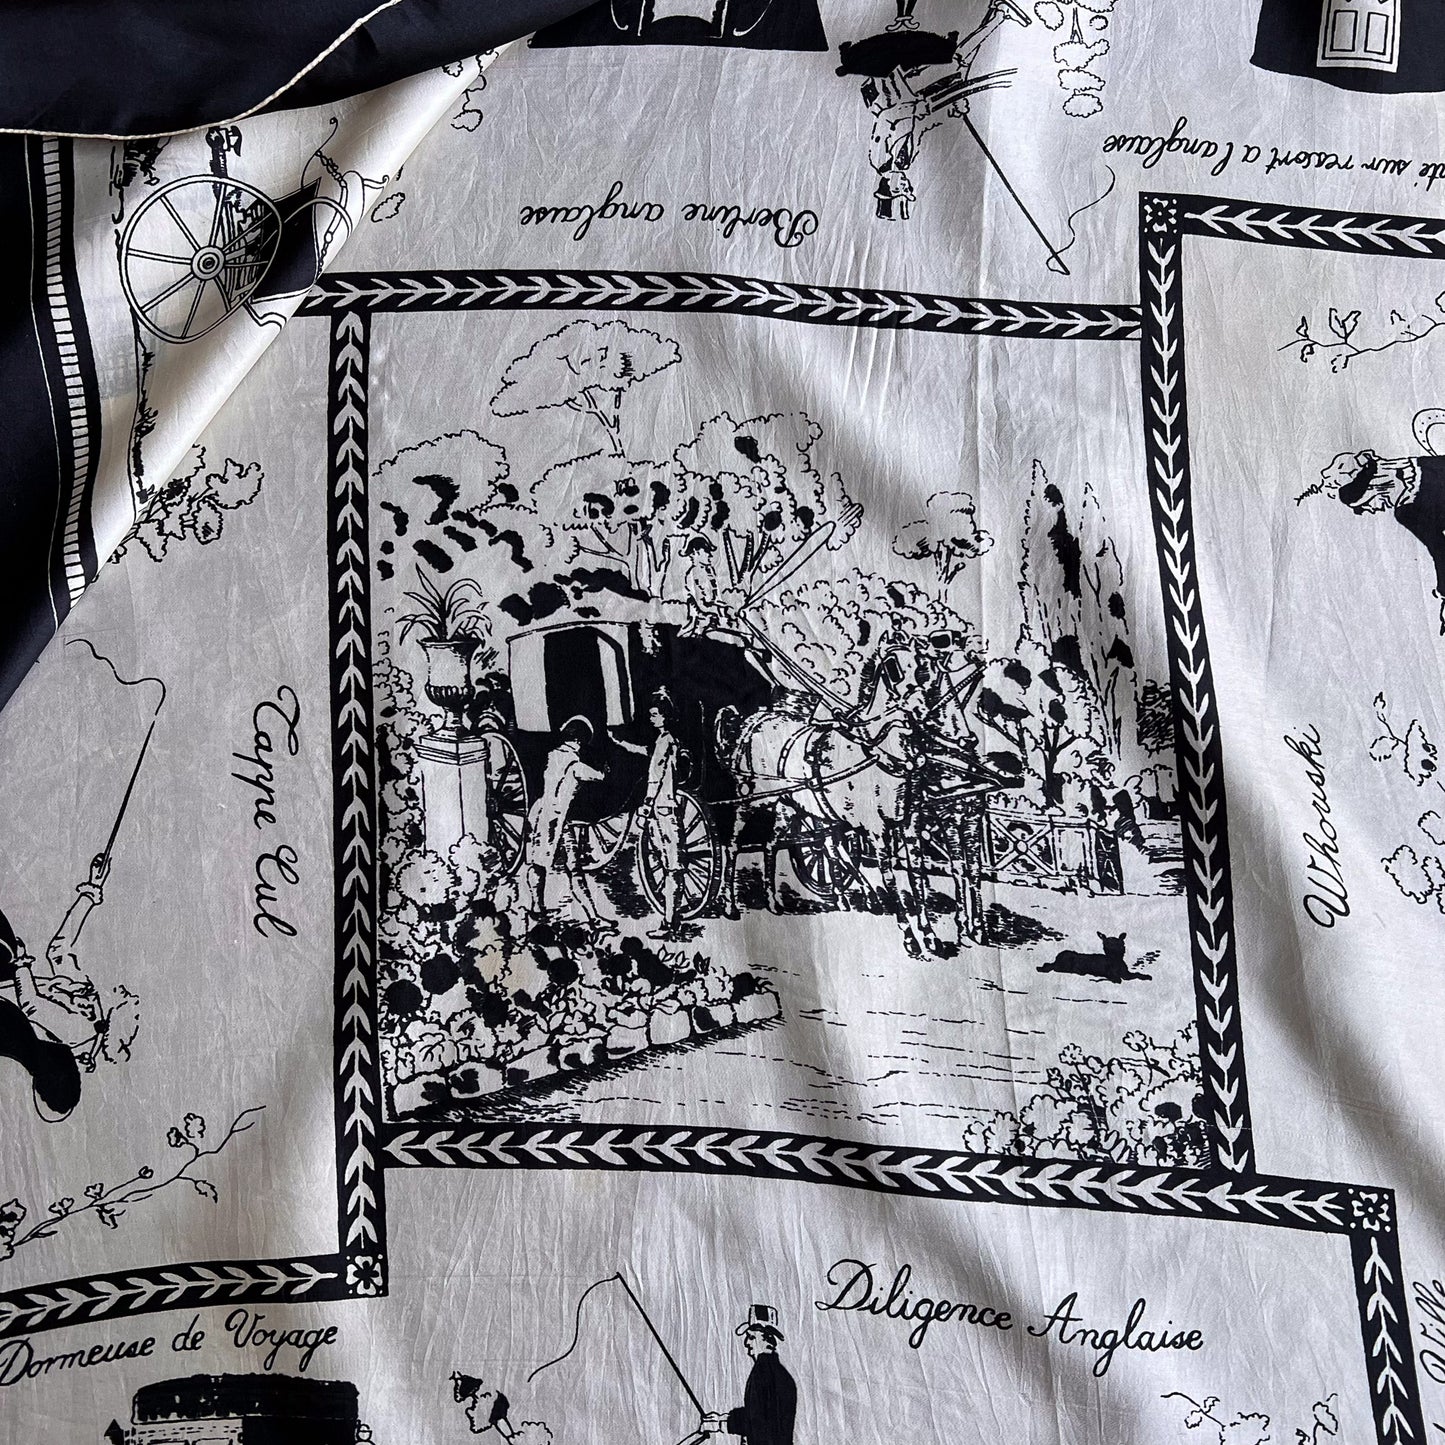 1950s Black and White Victorian Carriages Silk Scarf